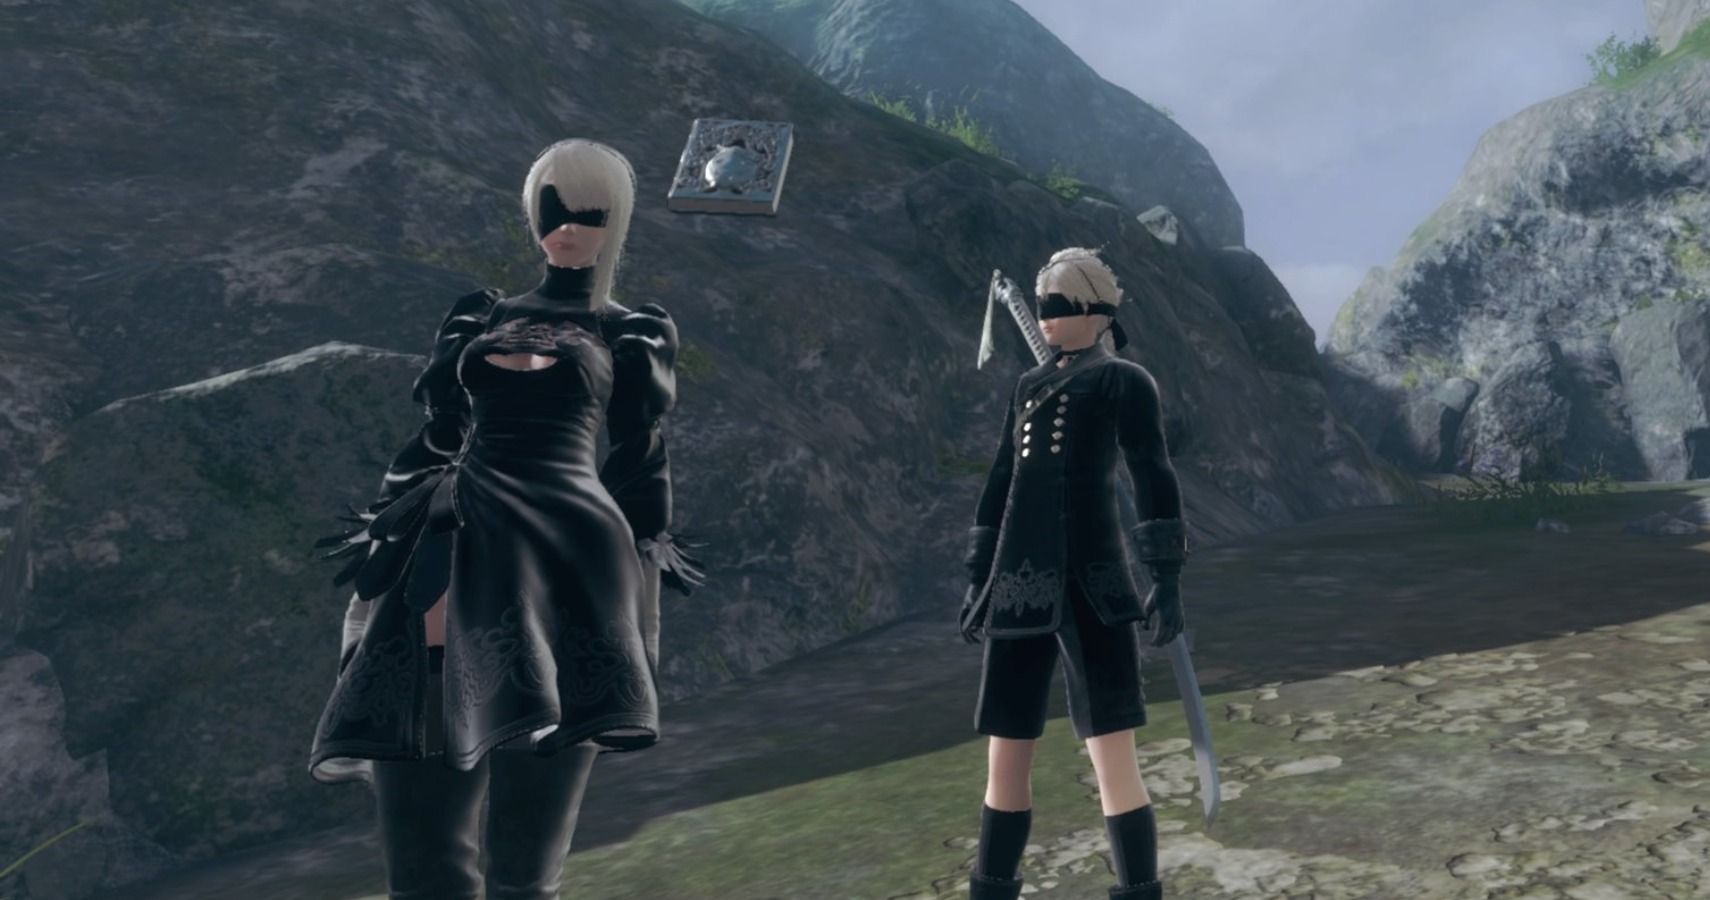 Nier Replicant: How To Change And Equip Outfits